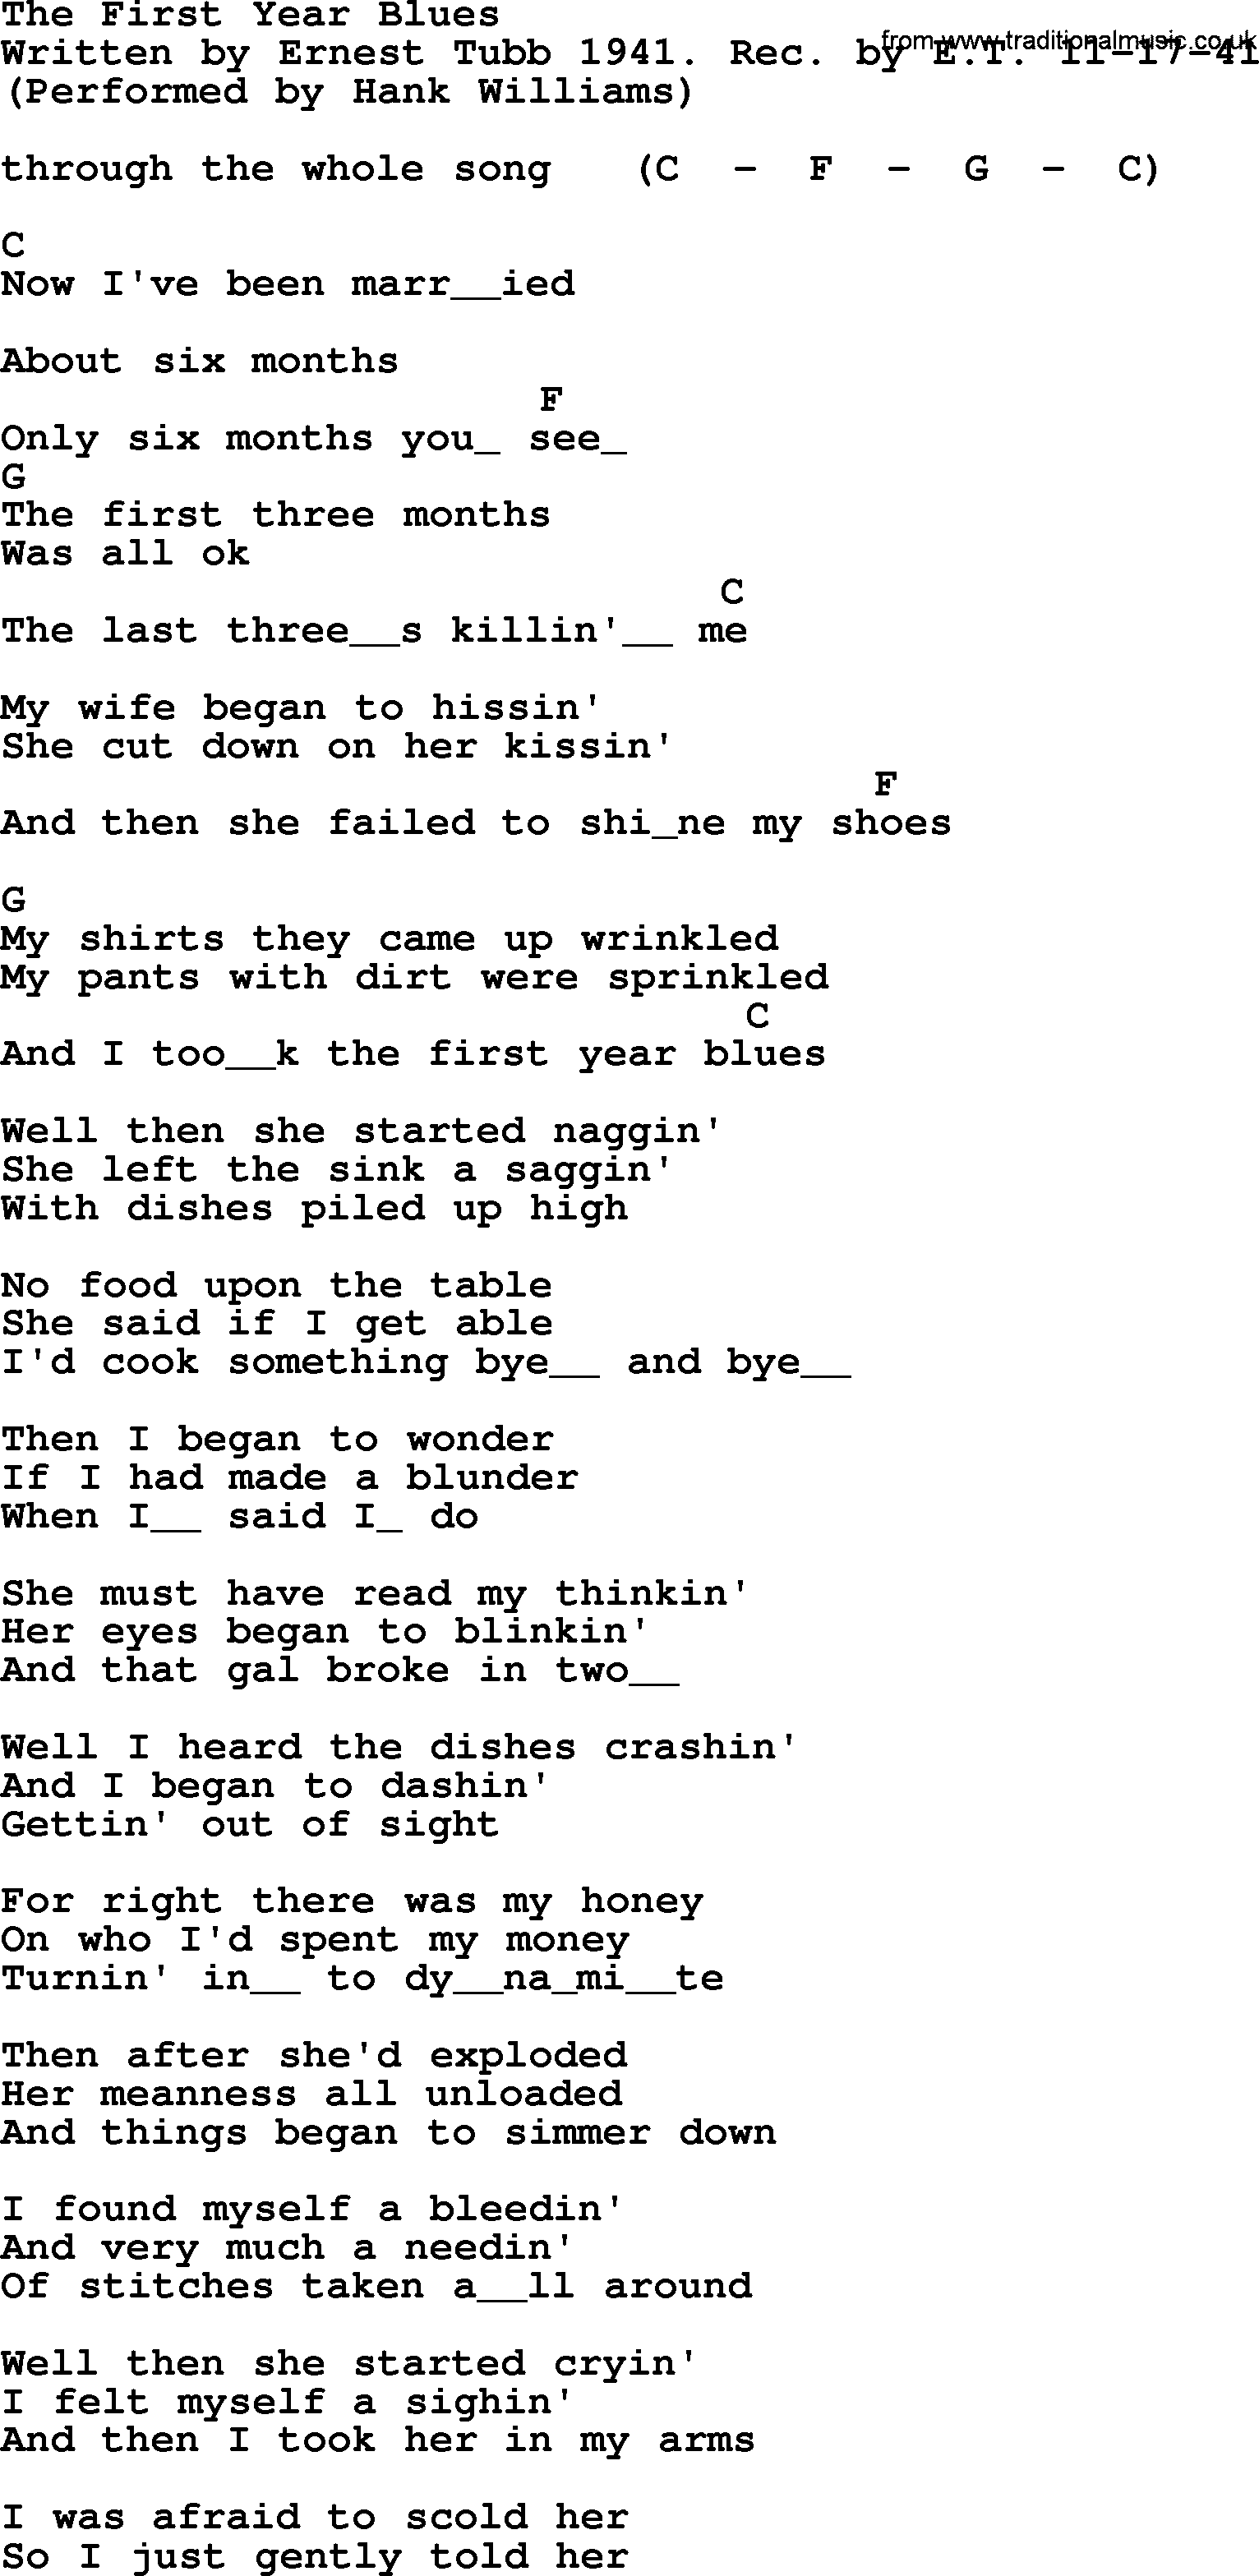 Hank Williams song The First Year Blues, lyrics and chords